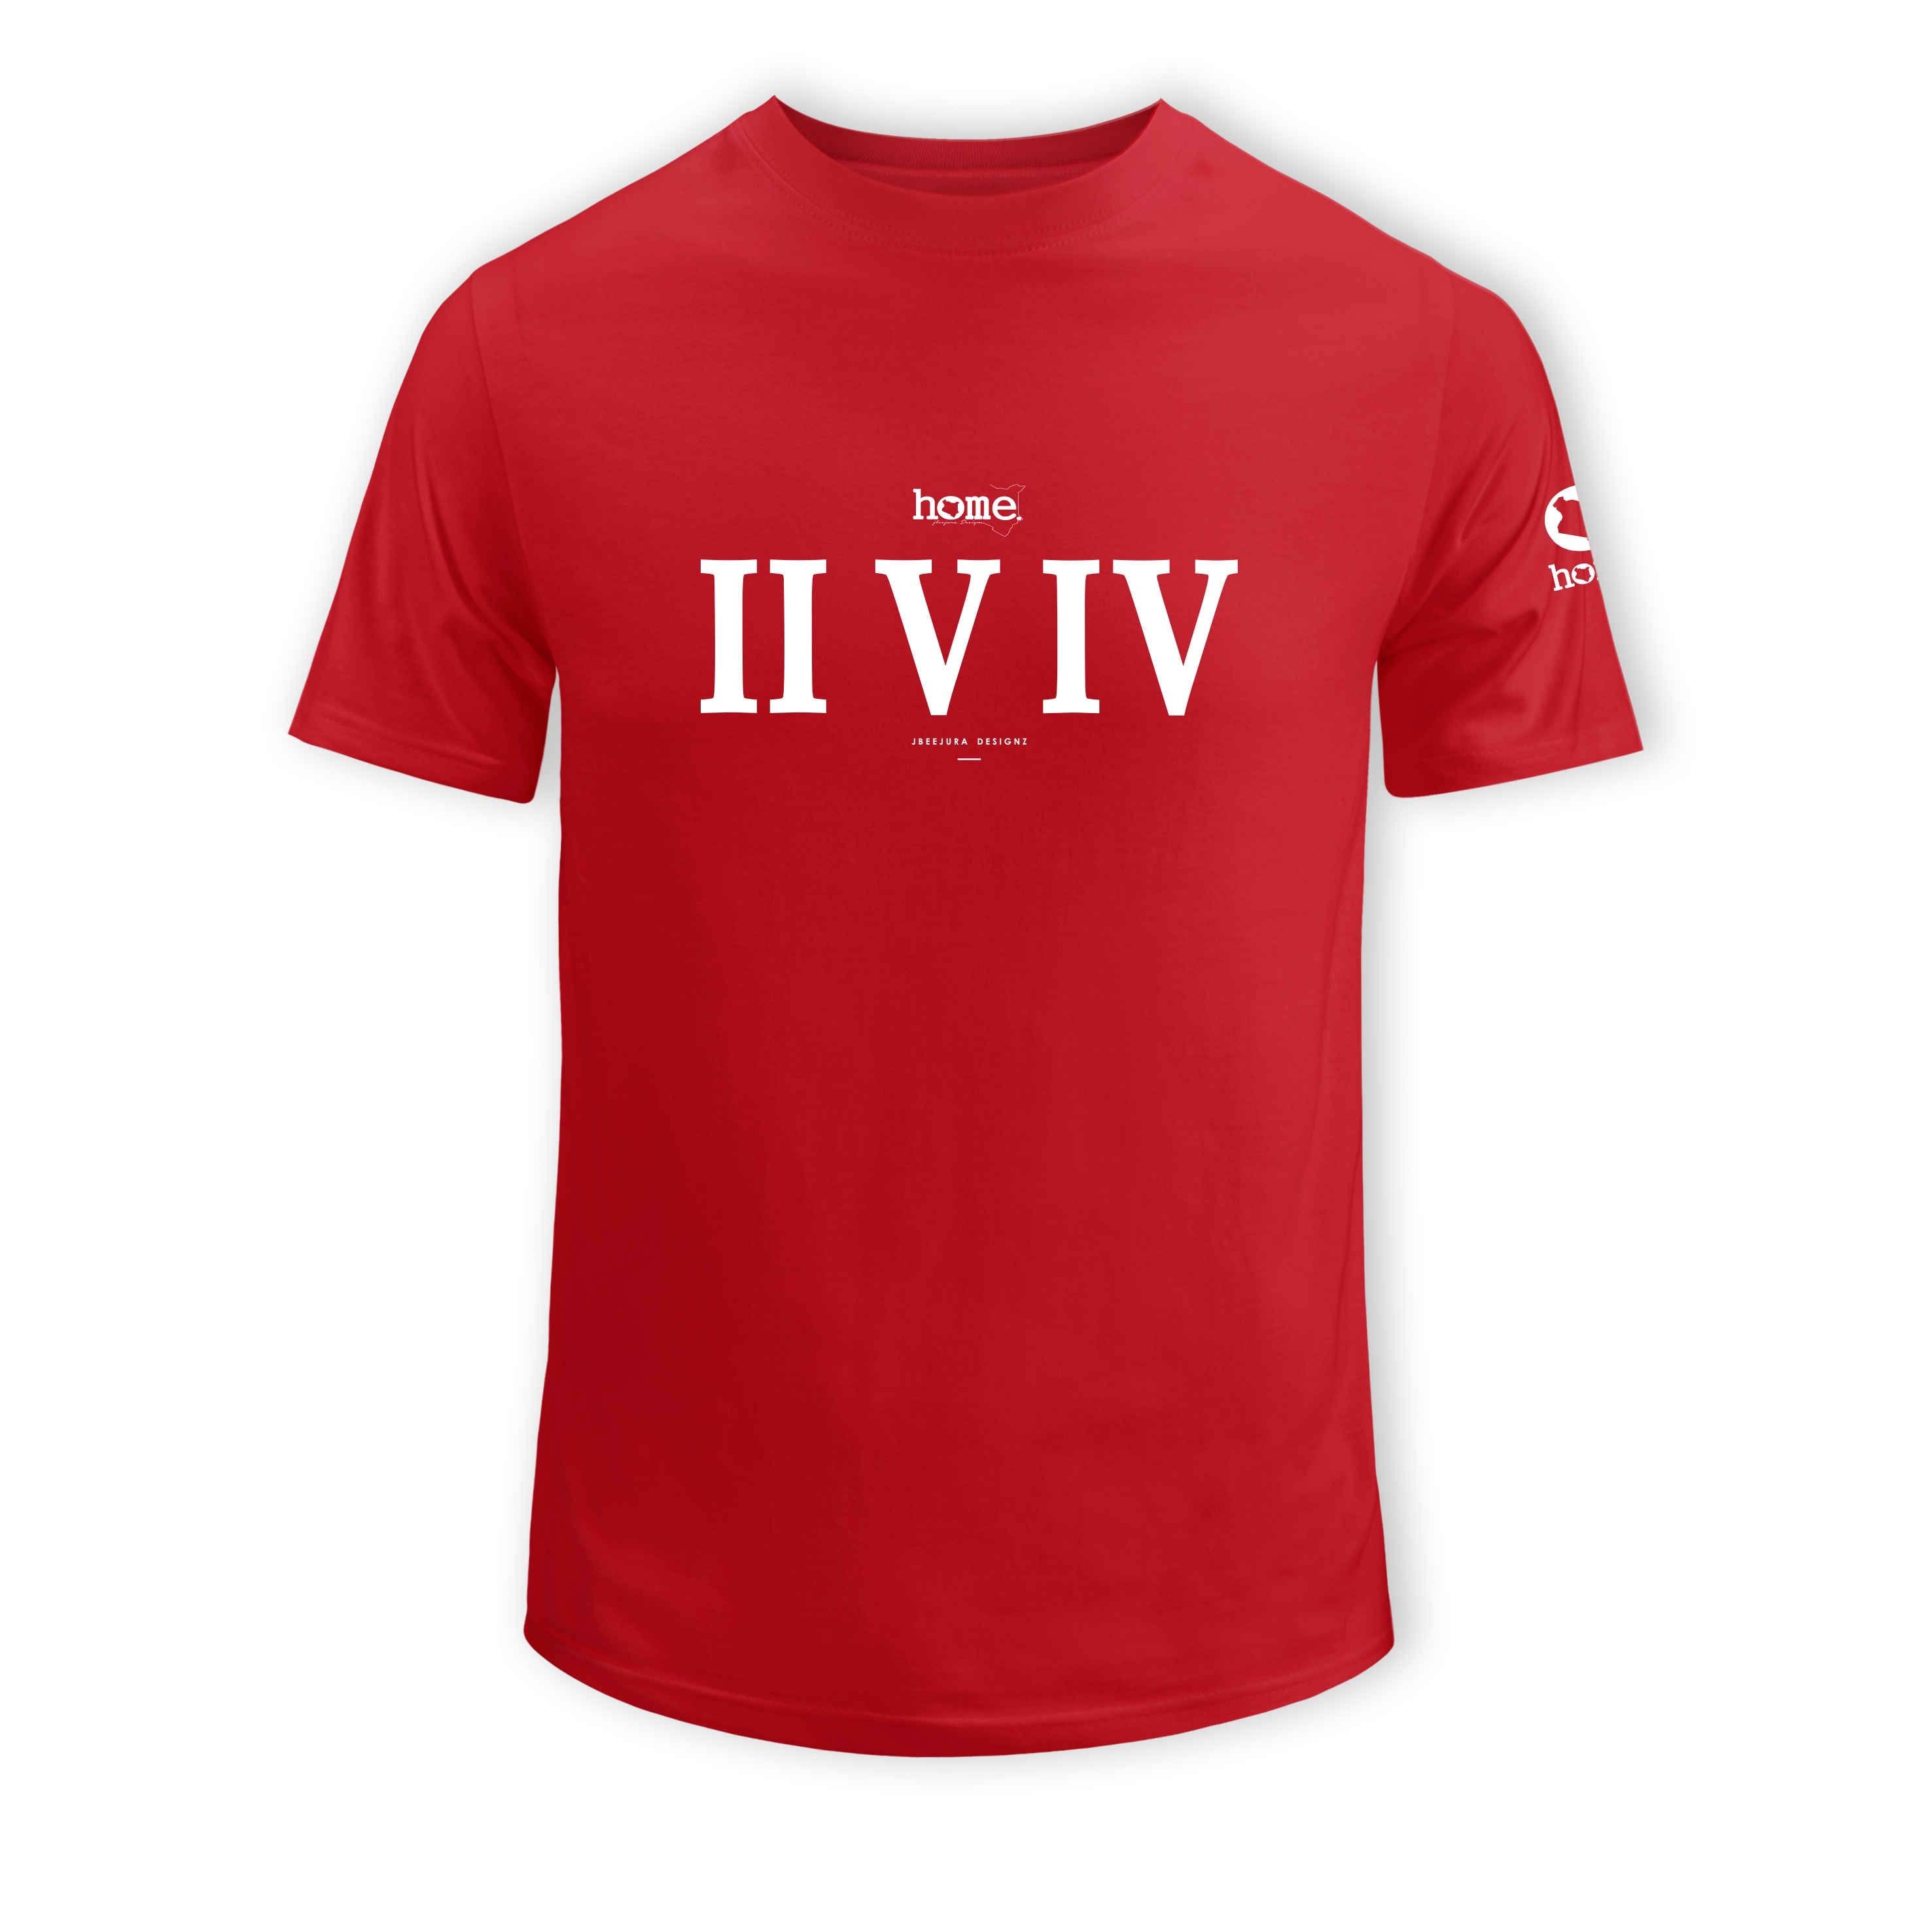 home_254 KIDS SHORT-SLEEVED RED T-SHIRT WITH A WHITE ROMAN NUMERALS PRINT – COTTON PLUS FABRIC